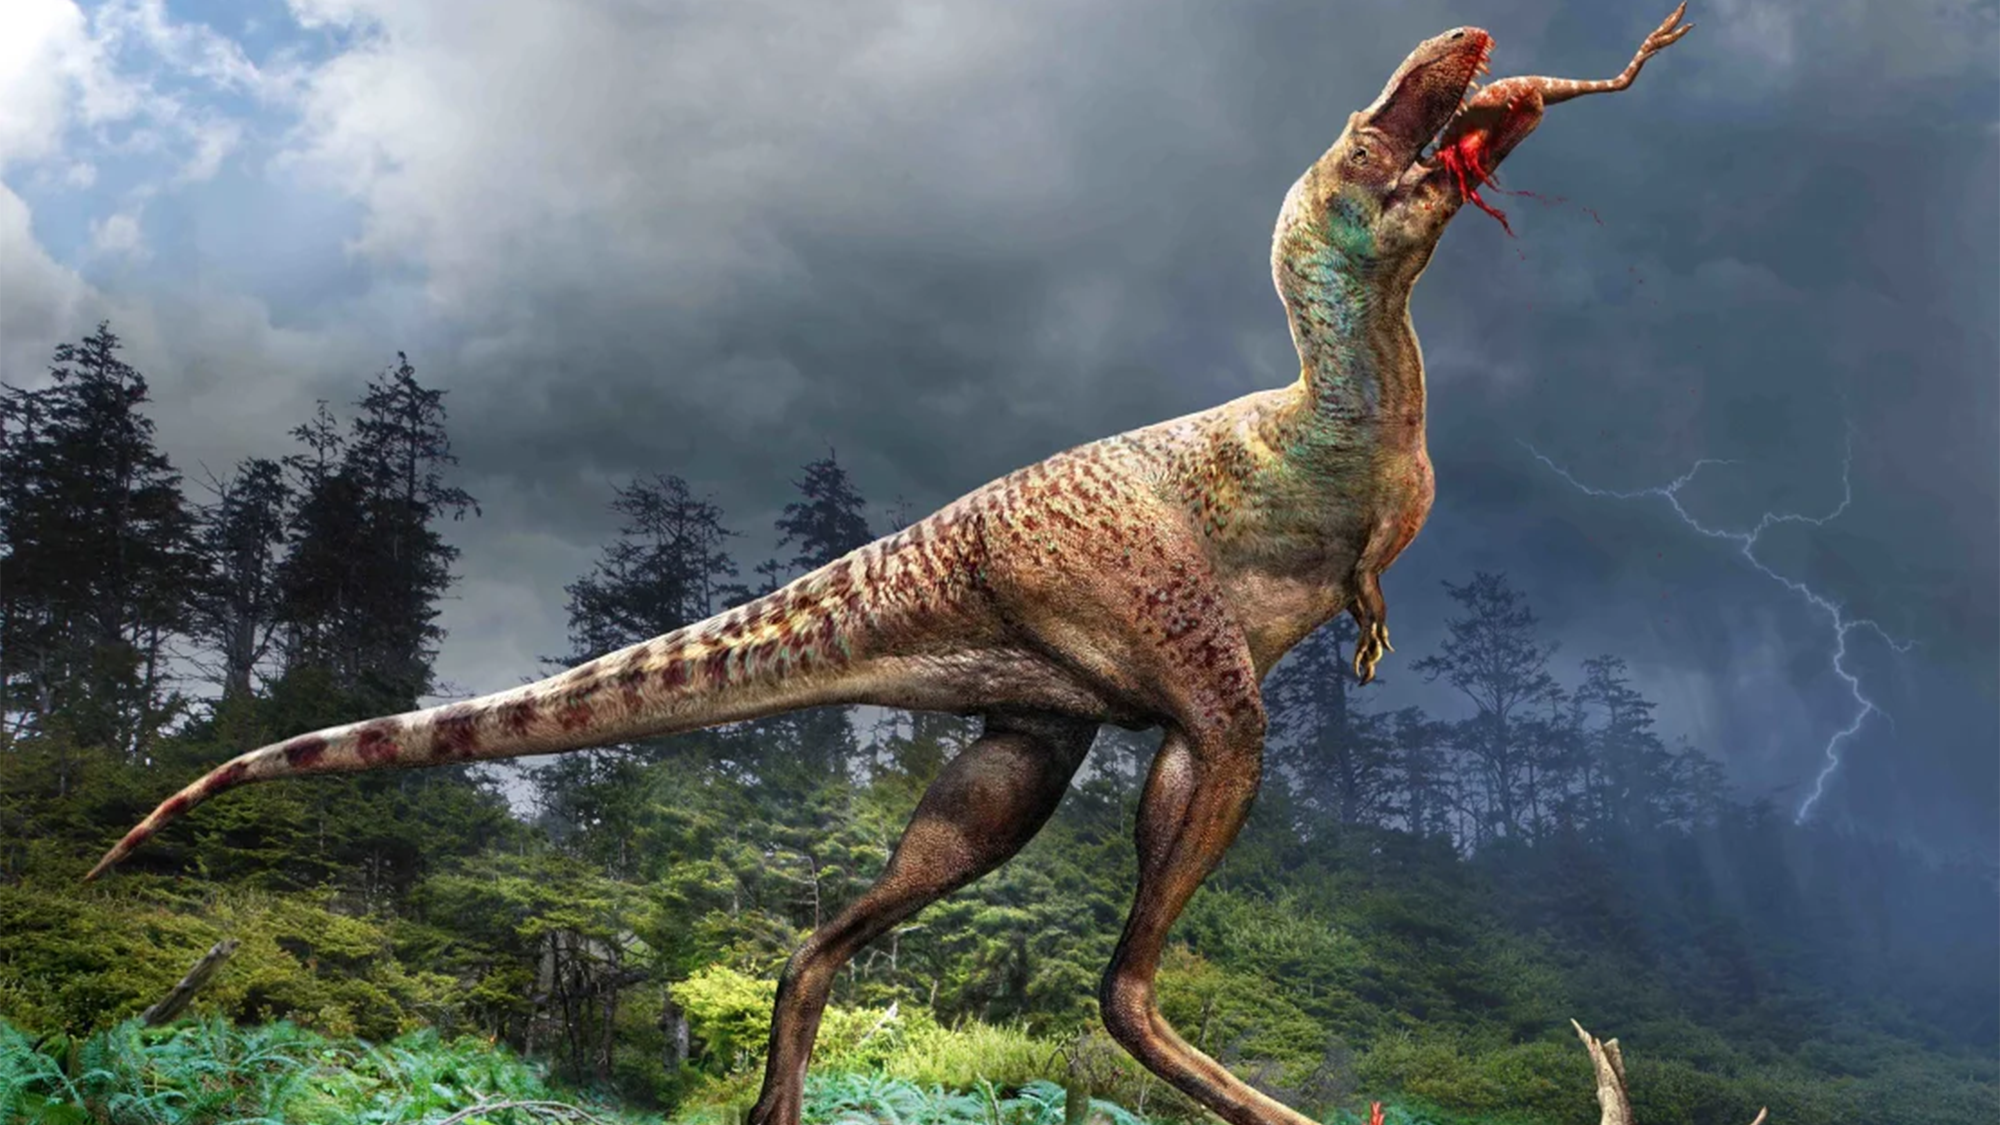 This teenage tyrannosaur had a stomach full of dino drumsticks